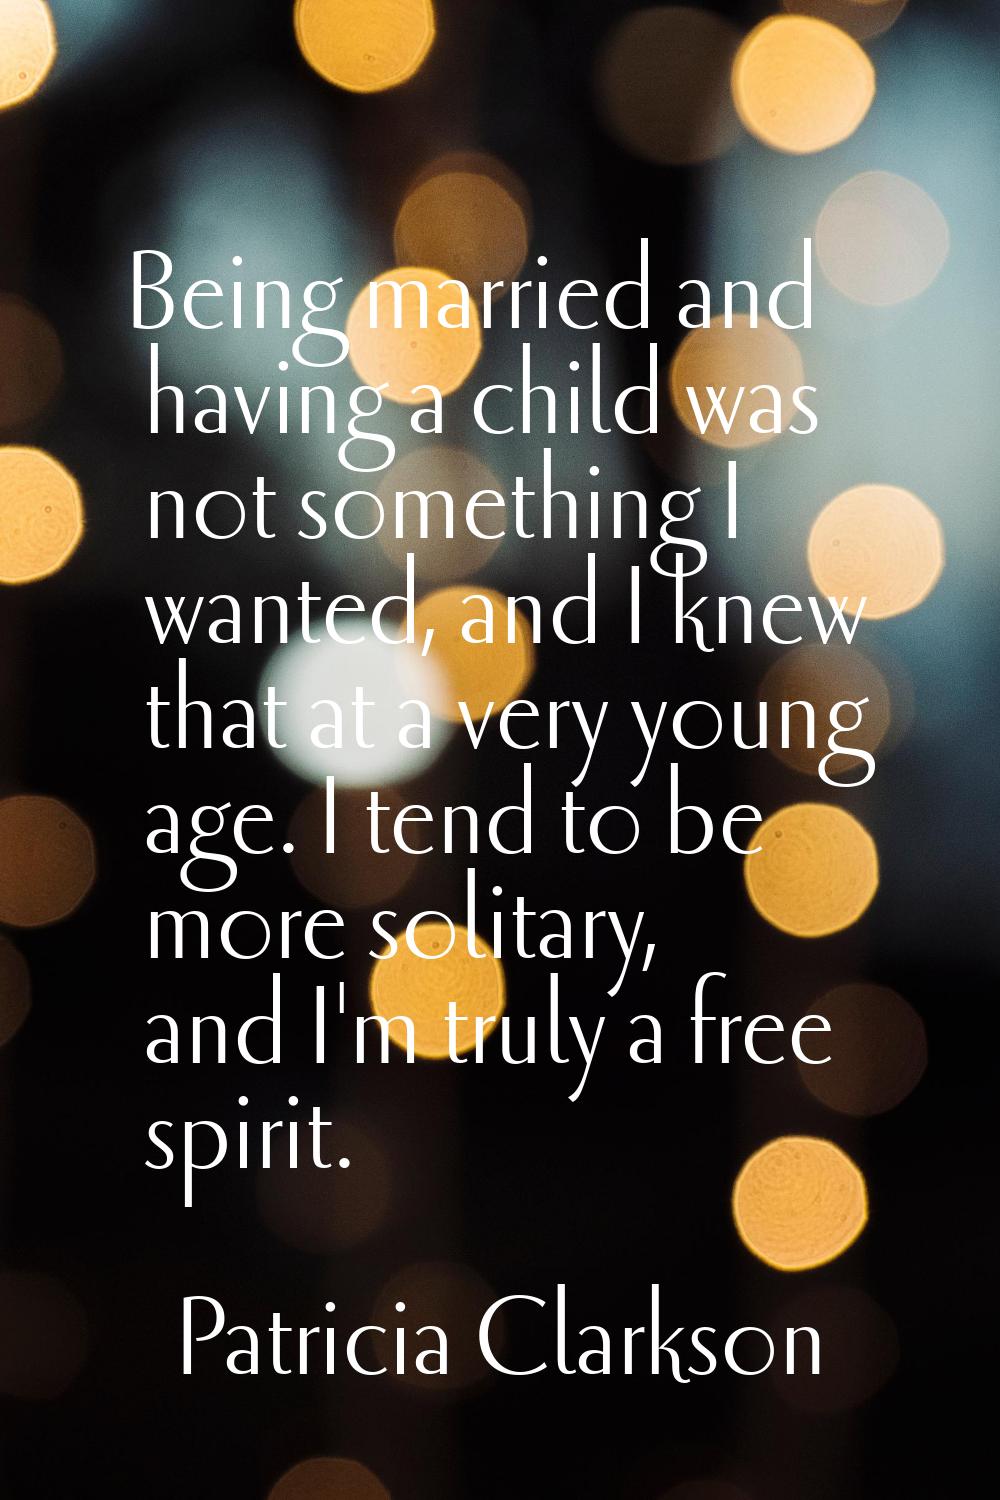 Being married and having a child was not something I wanted, and I knew that at a very young age. I